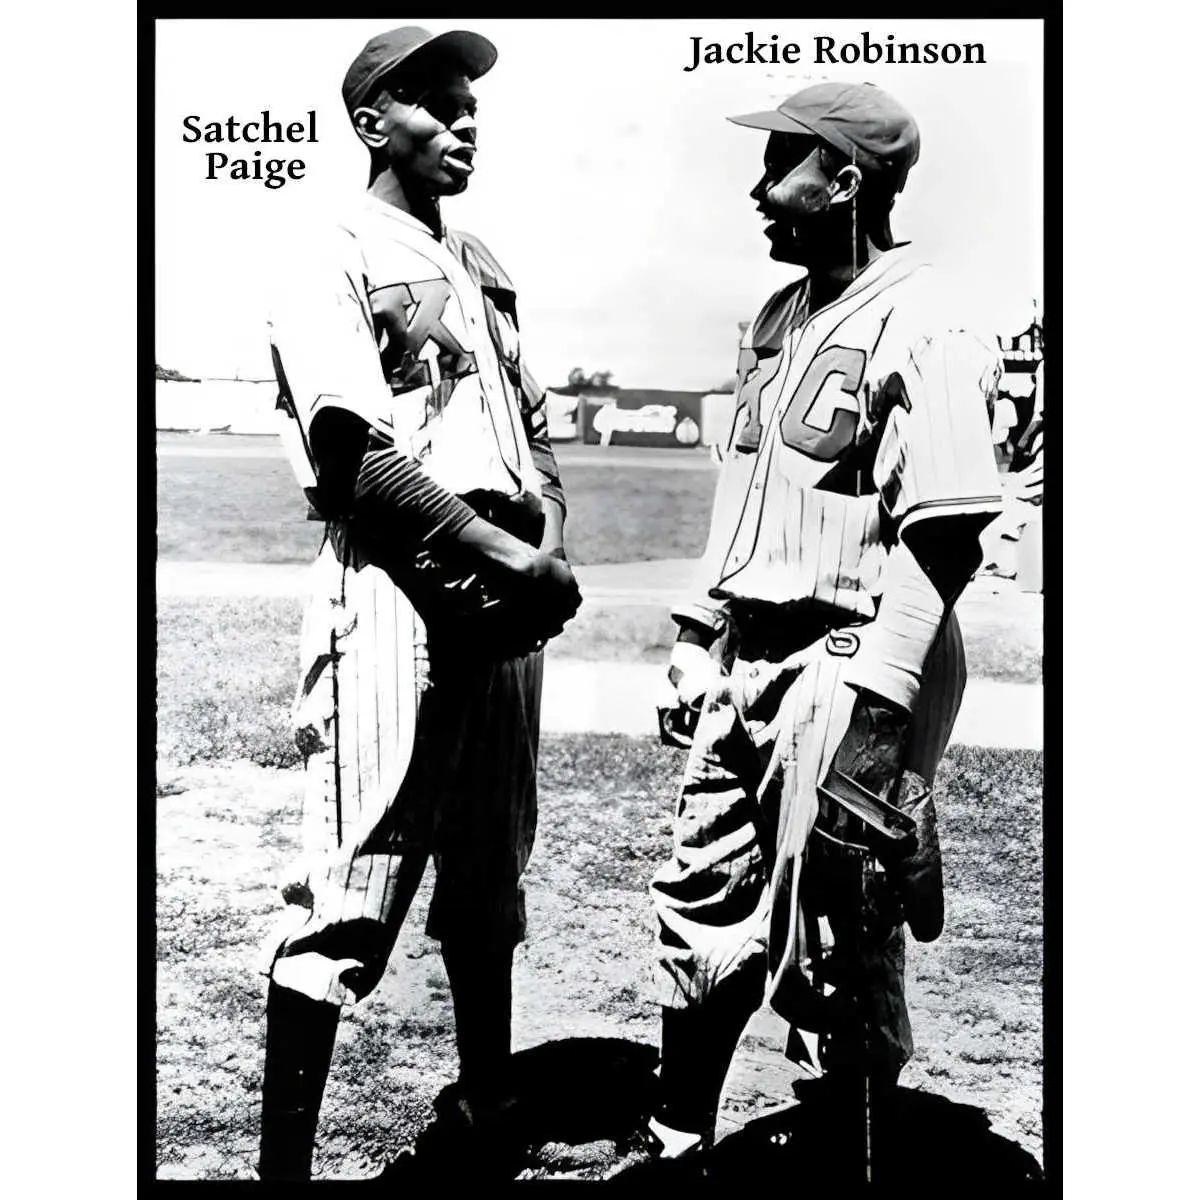 Satchel Paige and Jackie Robinson stand together talking, they are wearing baseball uniforms